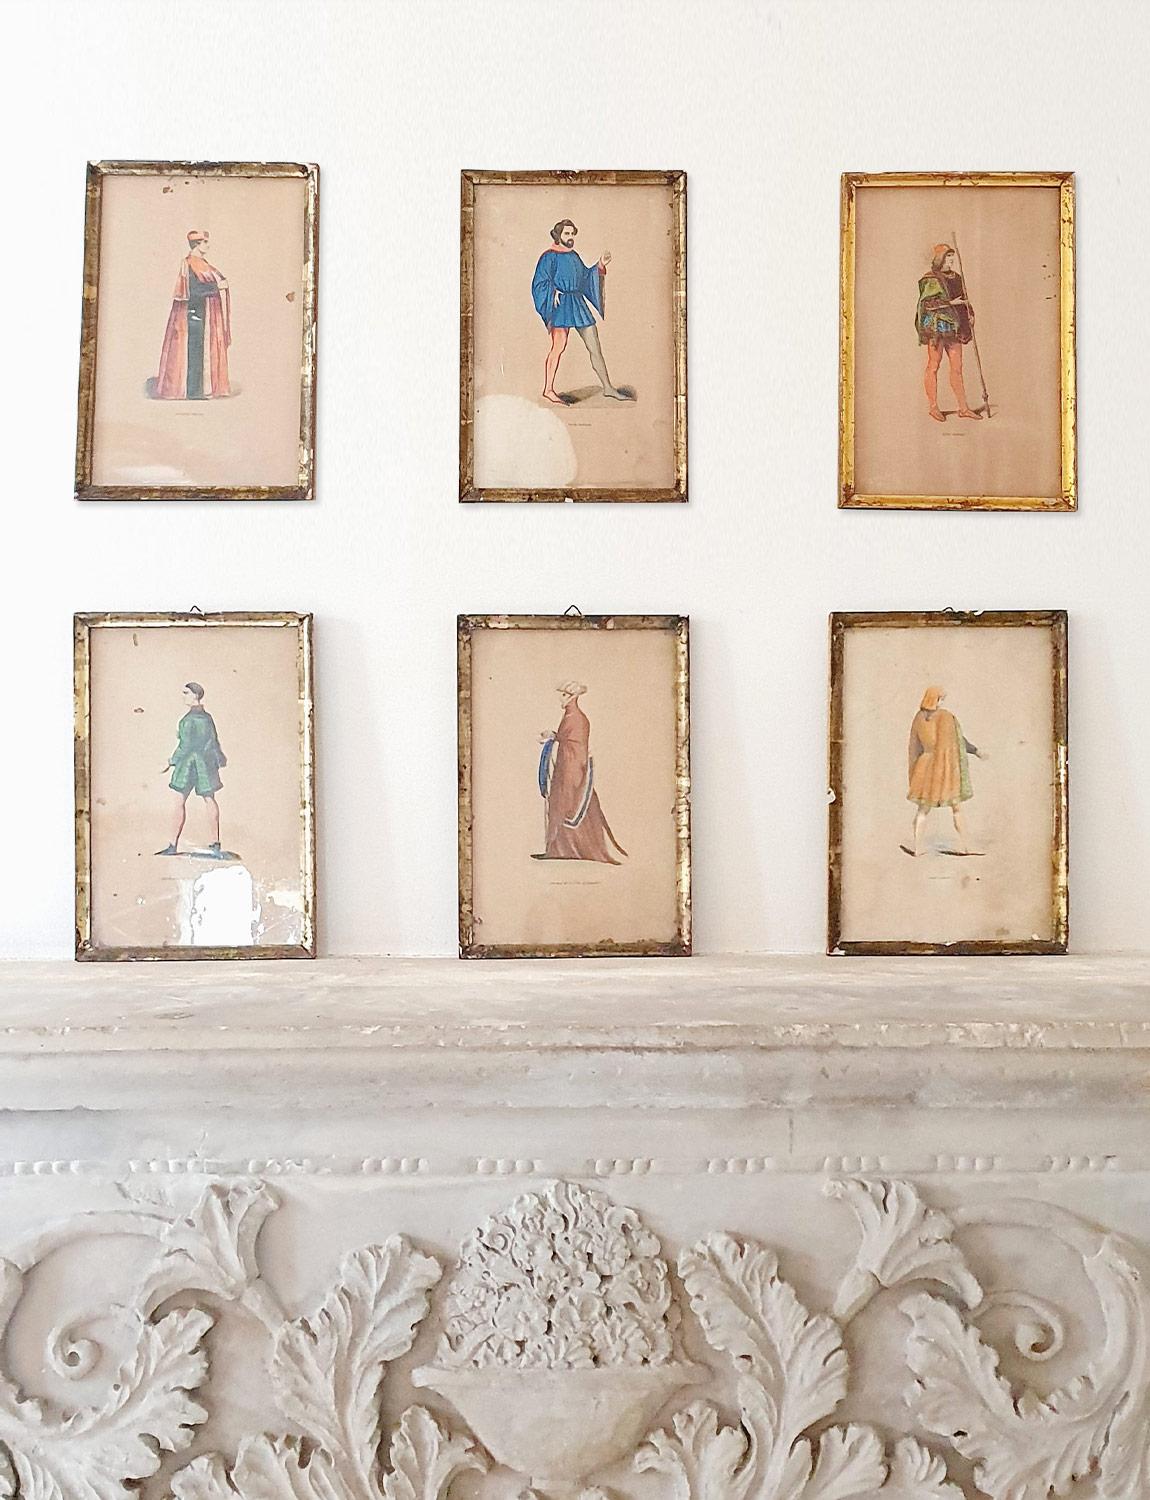 A beautiful set of Six prints each dipicting French 
and Italian noblemen in their formal 18th and 19h century costumes. The prints are in good condition considering their age but all would benefit from being reframed. 
Table of Prints:
Seigneur de